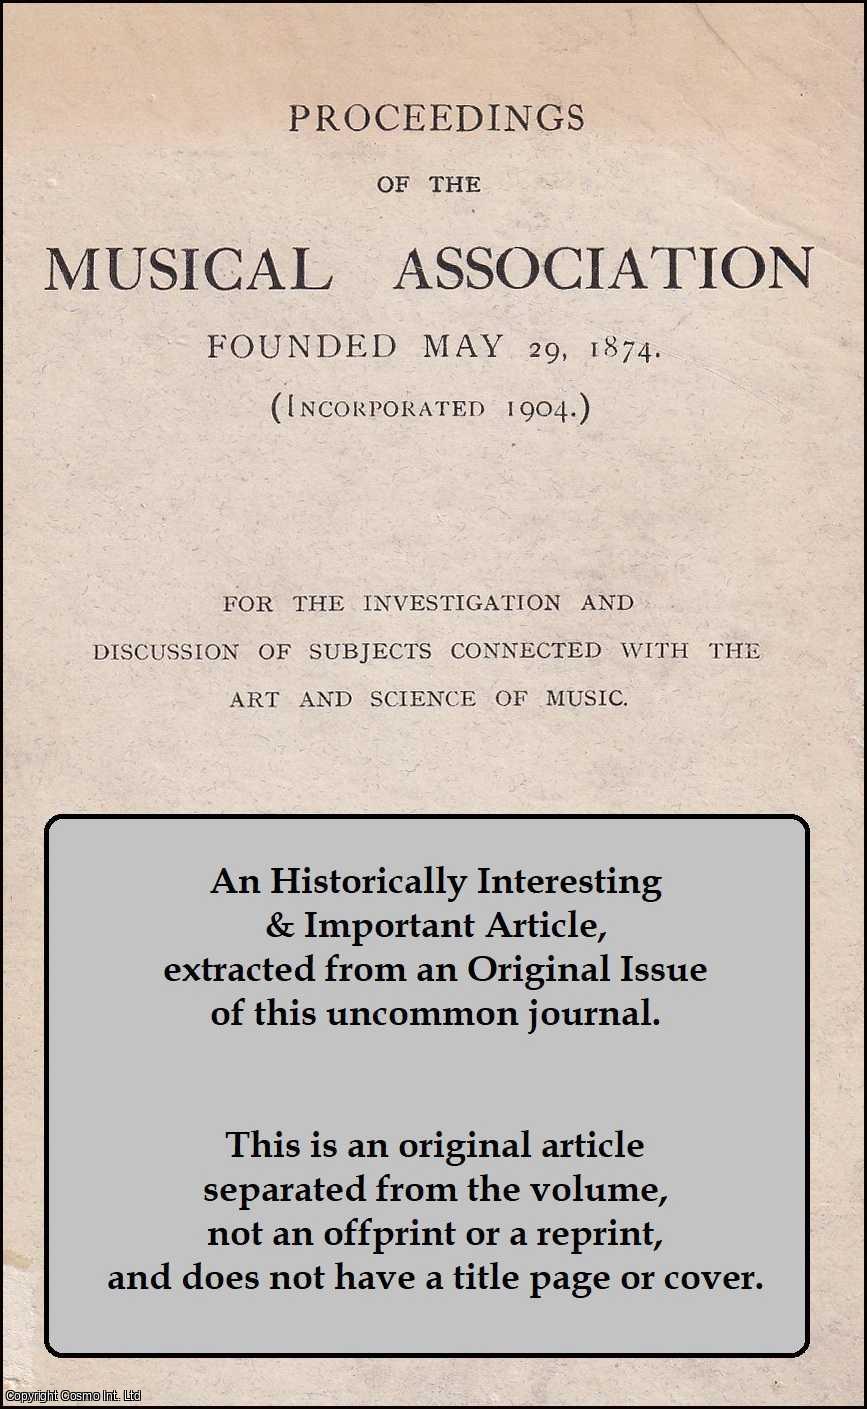 Herbert Antcliffe - The Renascence of Dutch Music. An original article from The Proceedings of The Musical Association, 1925.